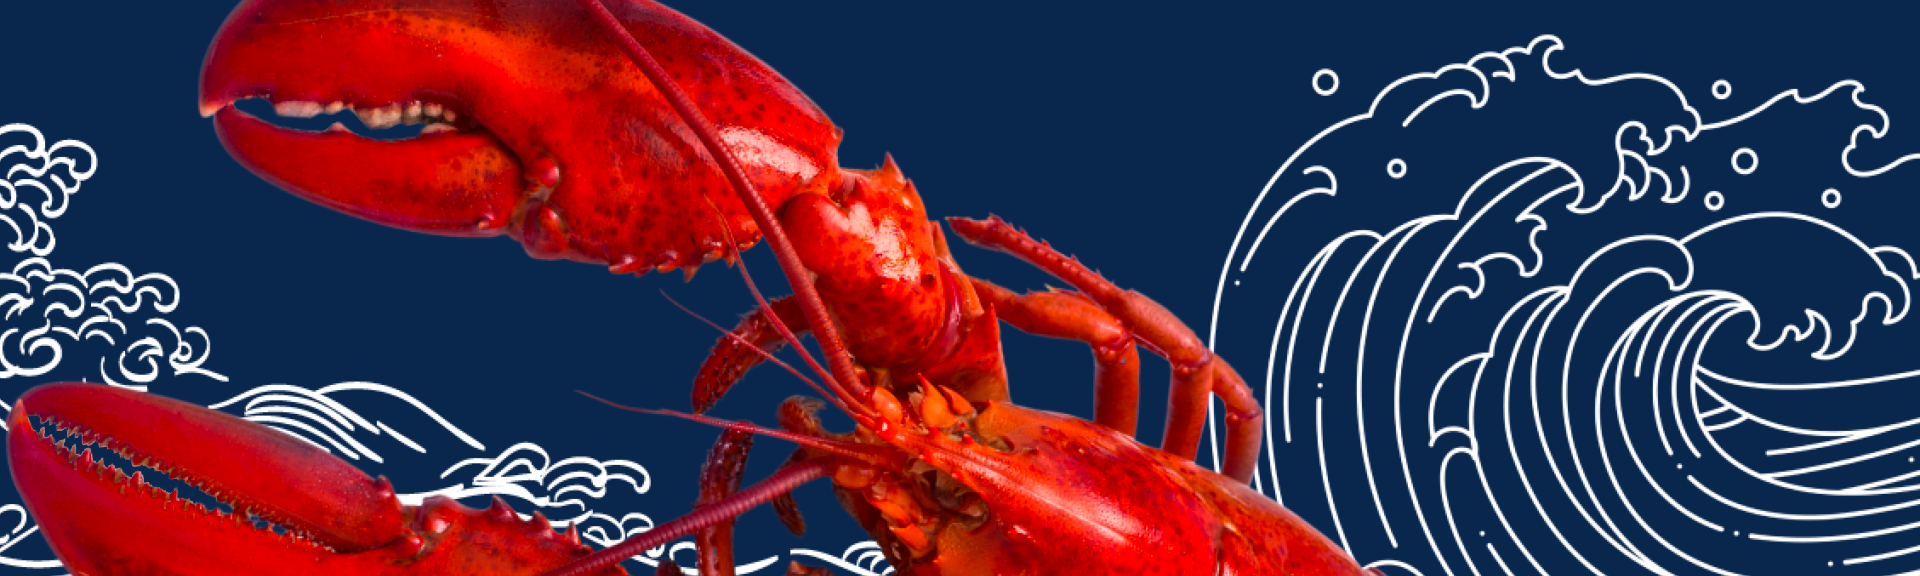 Holiday Recipes featuring Maine Lobster recipe image